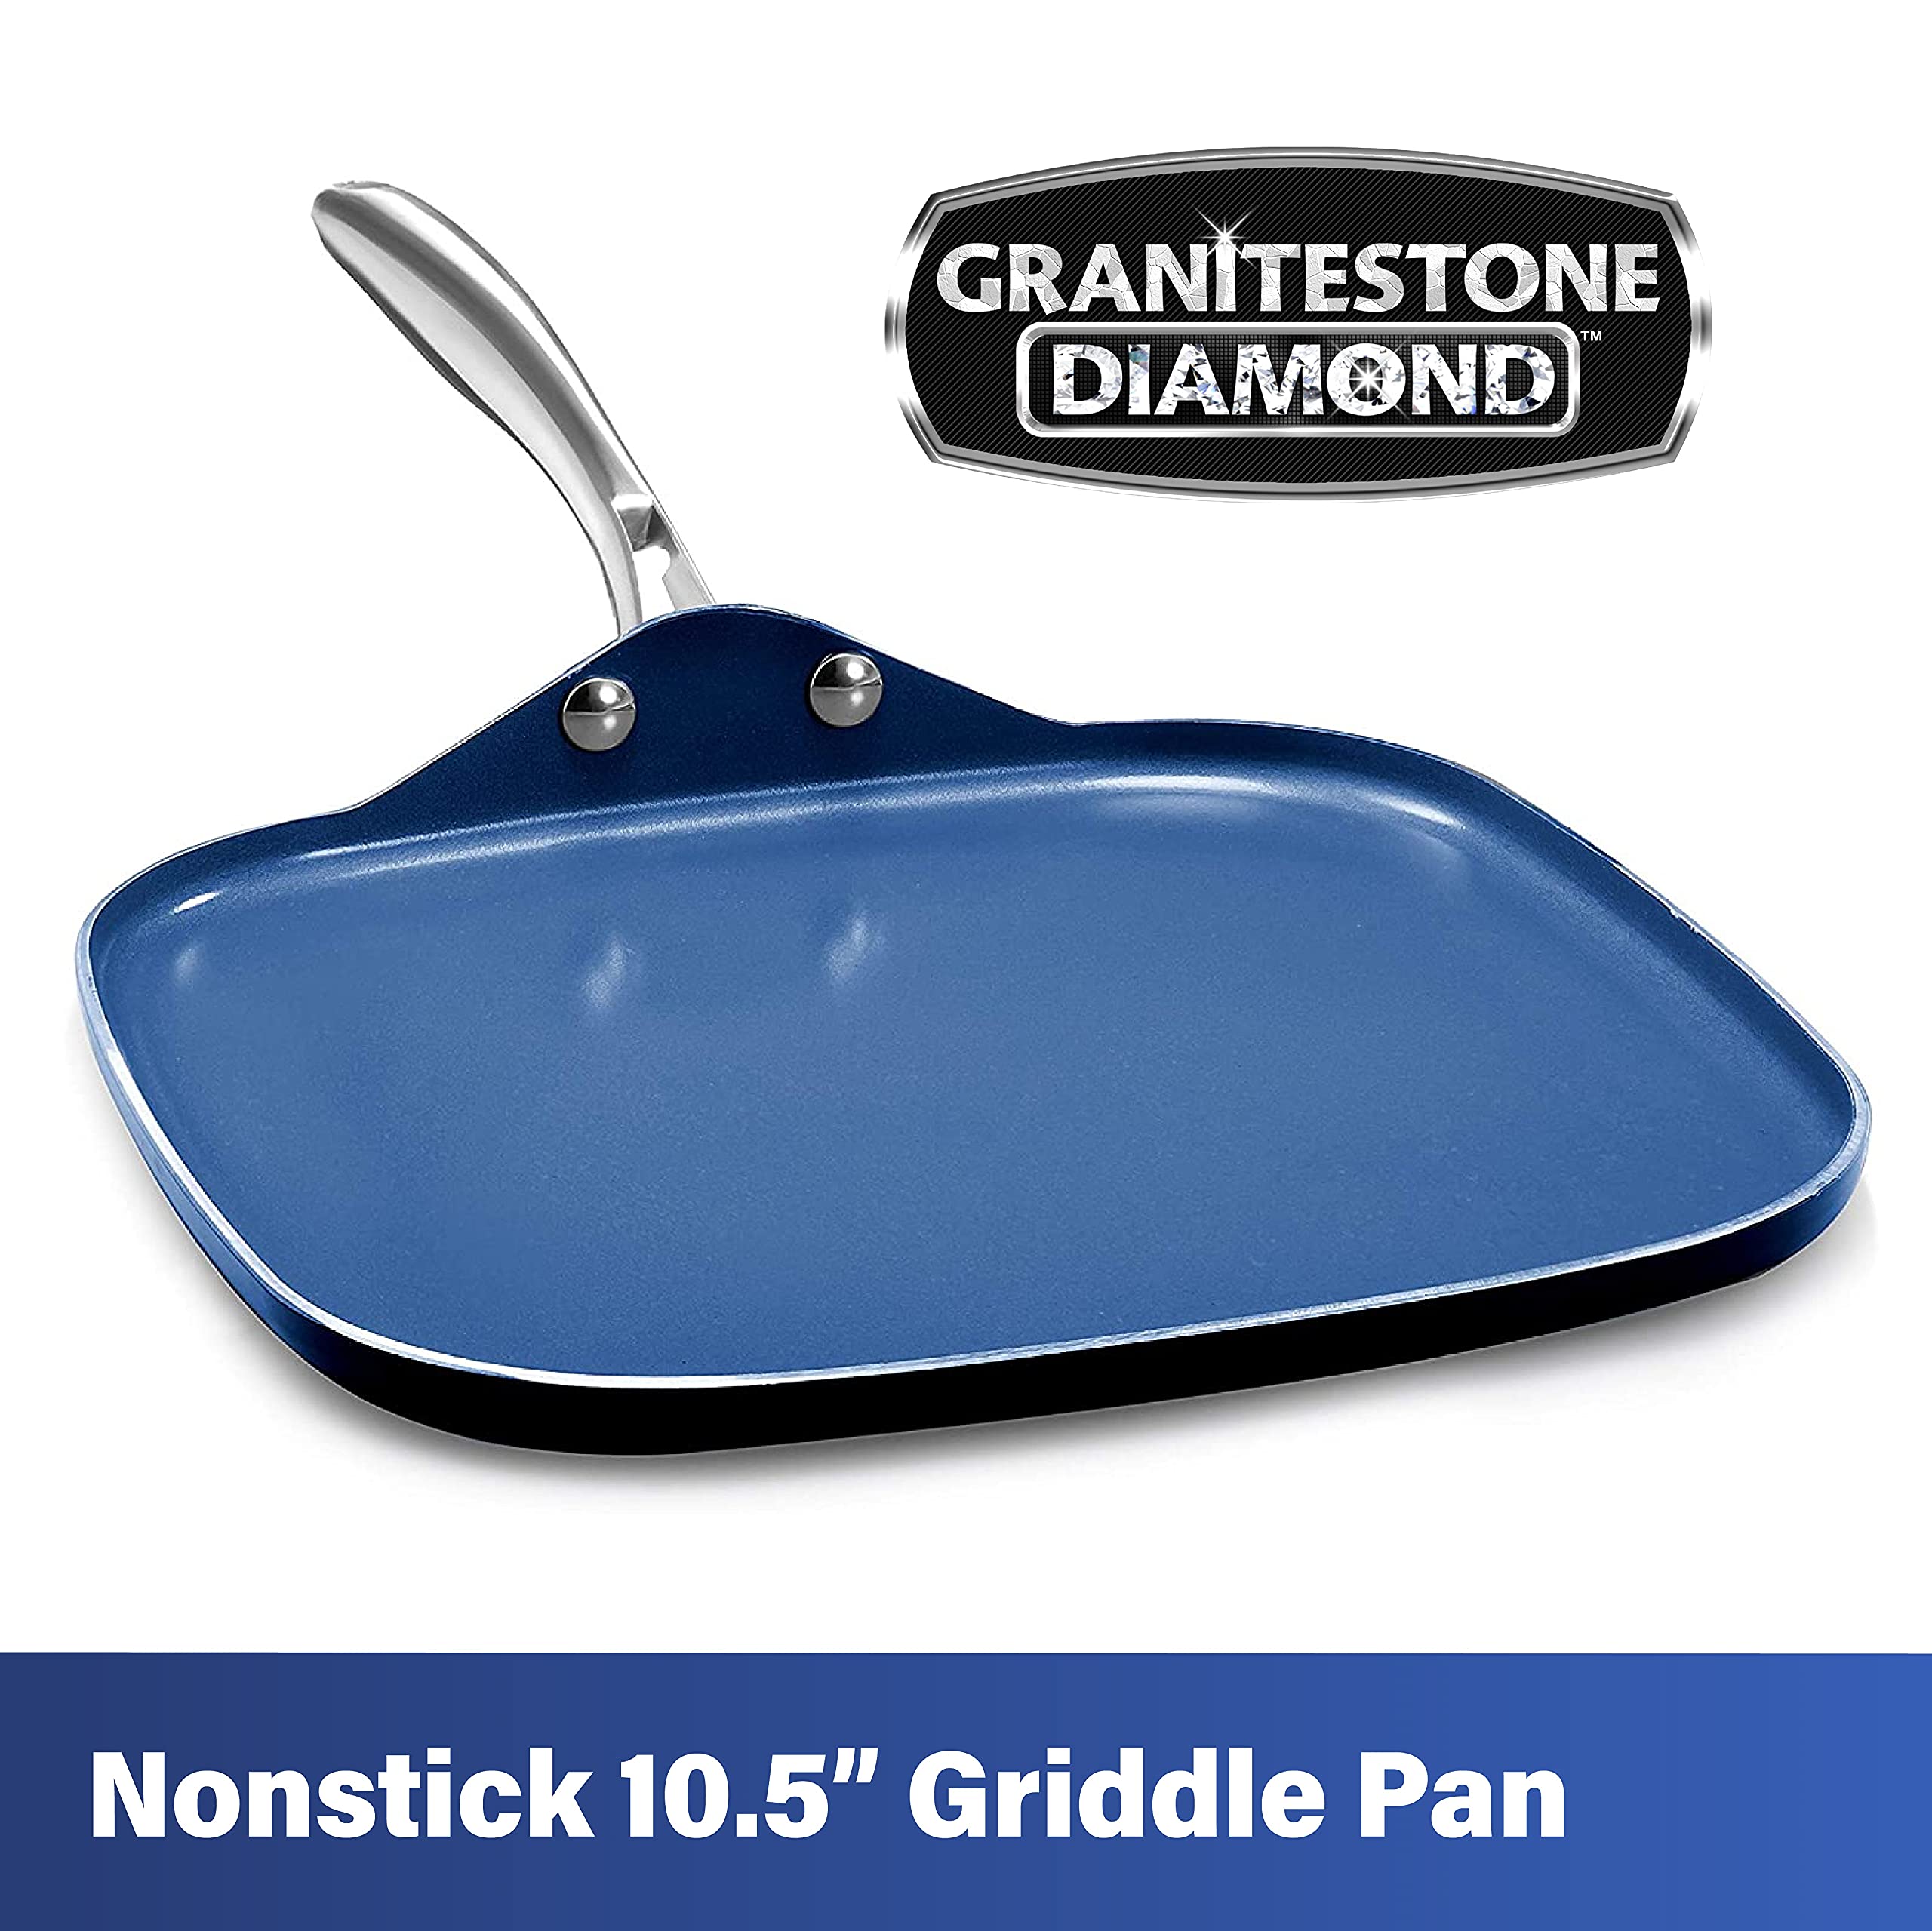 Granitestone Blue Nonstick 10.5” Griddle Pan/Flat Grill with Ultra Durable Mineral and Diamond Triple Coated Surface, Stay Cool Stainless-Steel Handle, Oven & Dishwasher Safe, 100% PFOA Free…